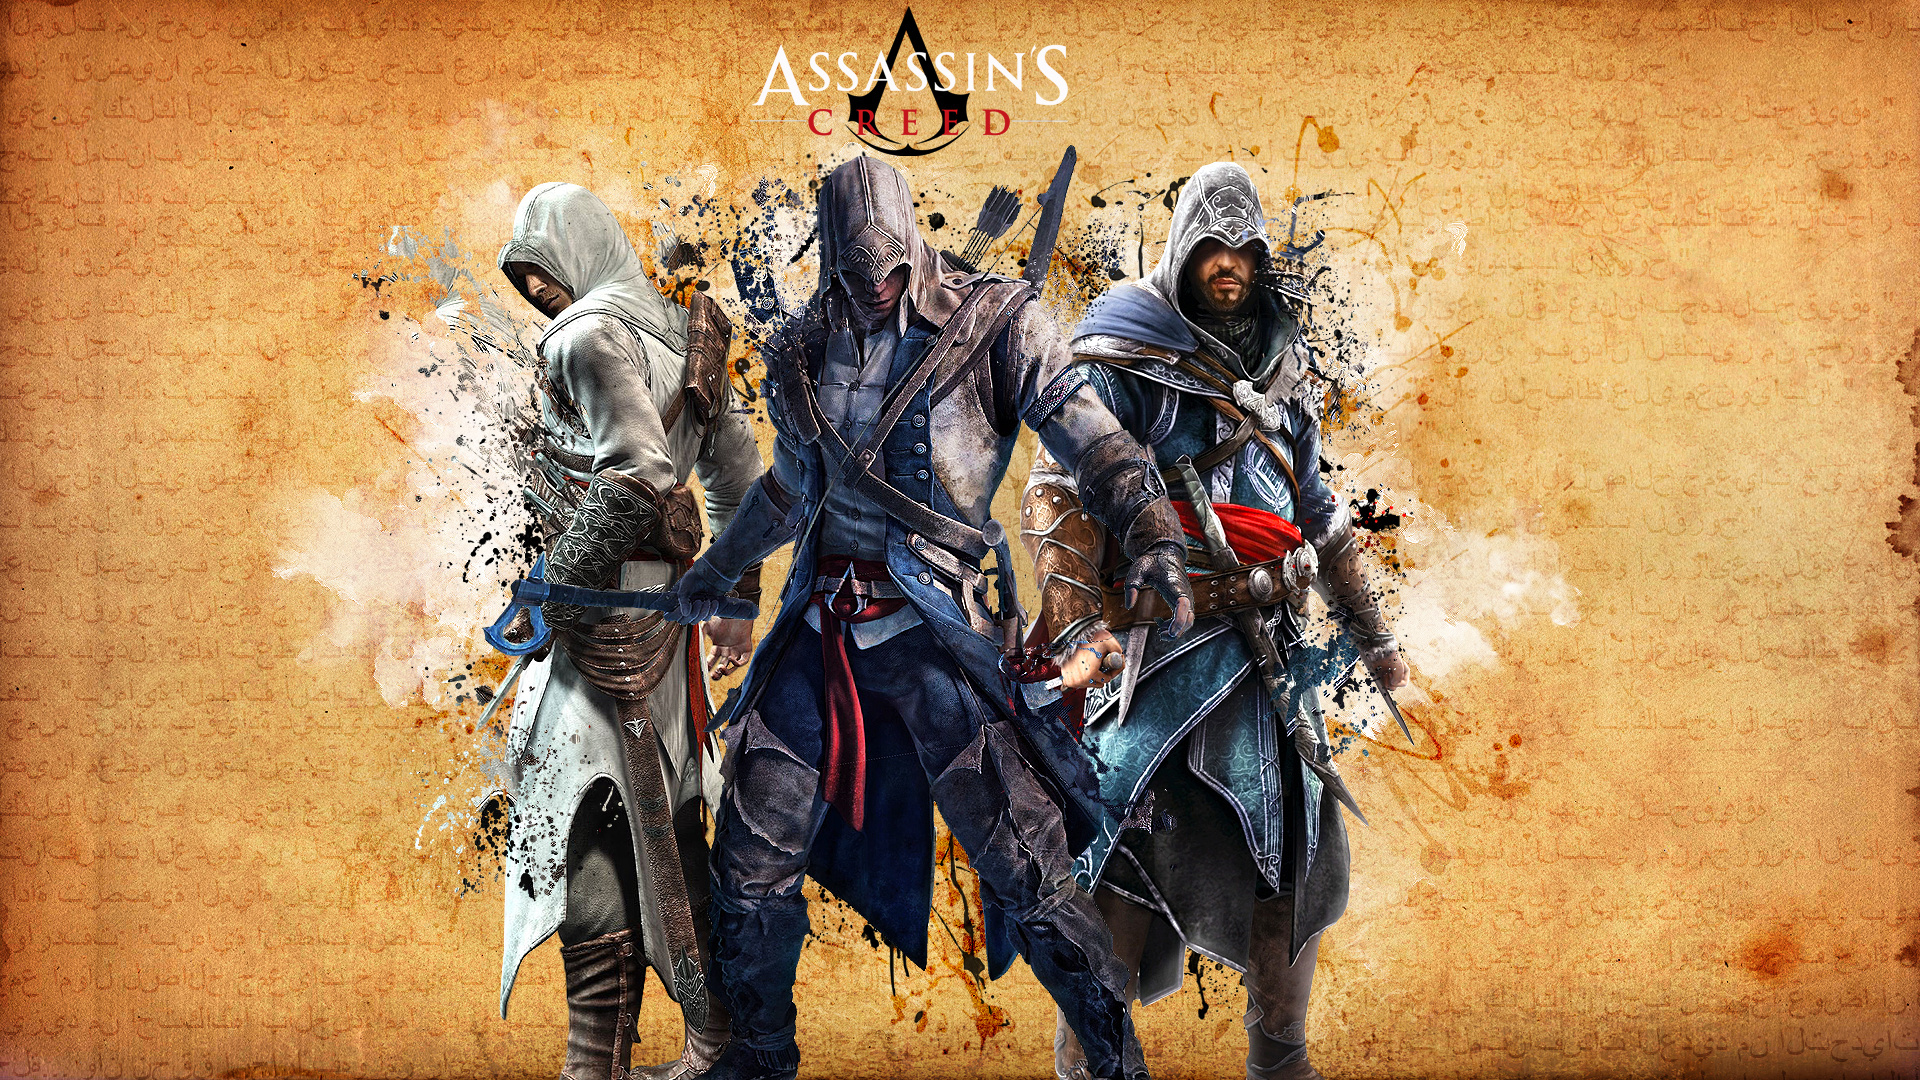 Assassin creed wallpapers download free